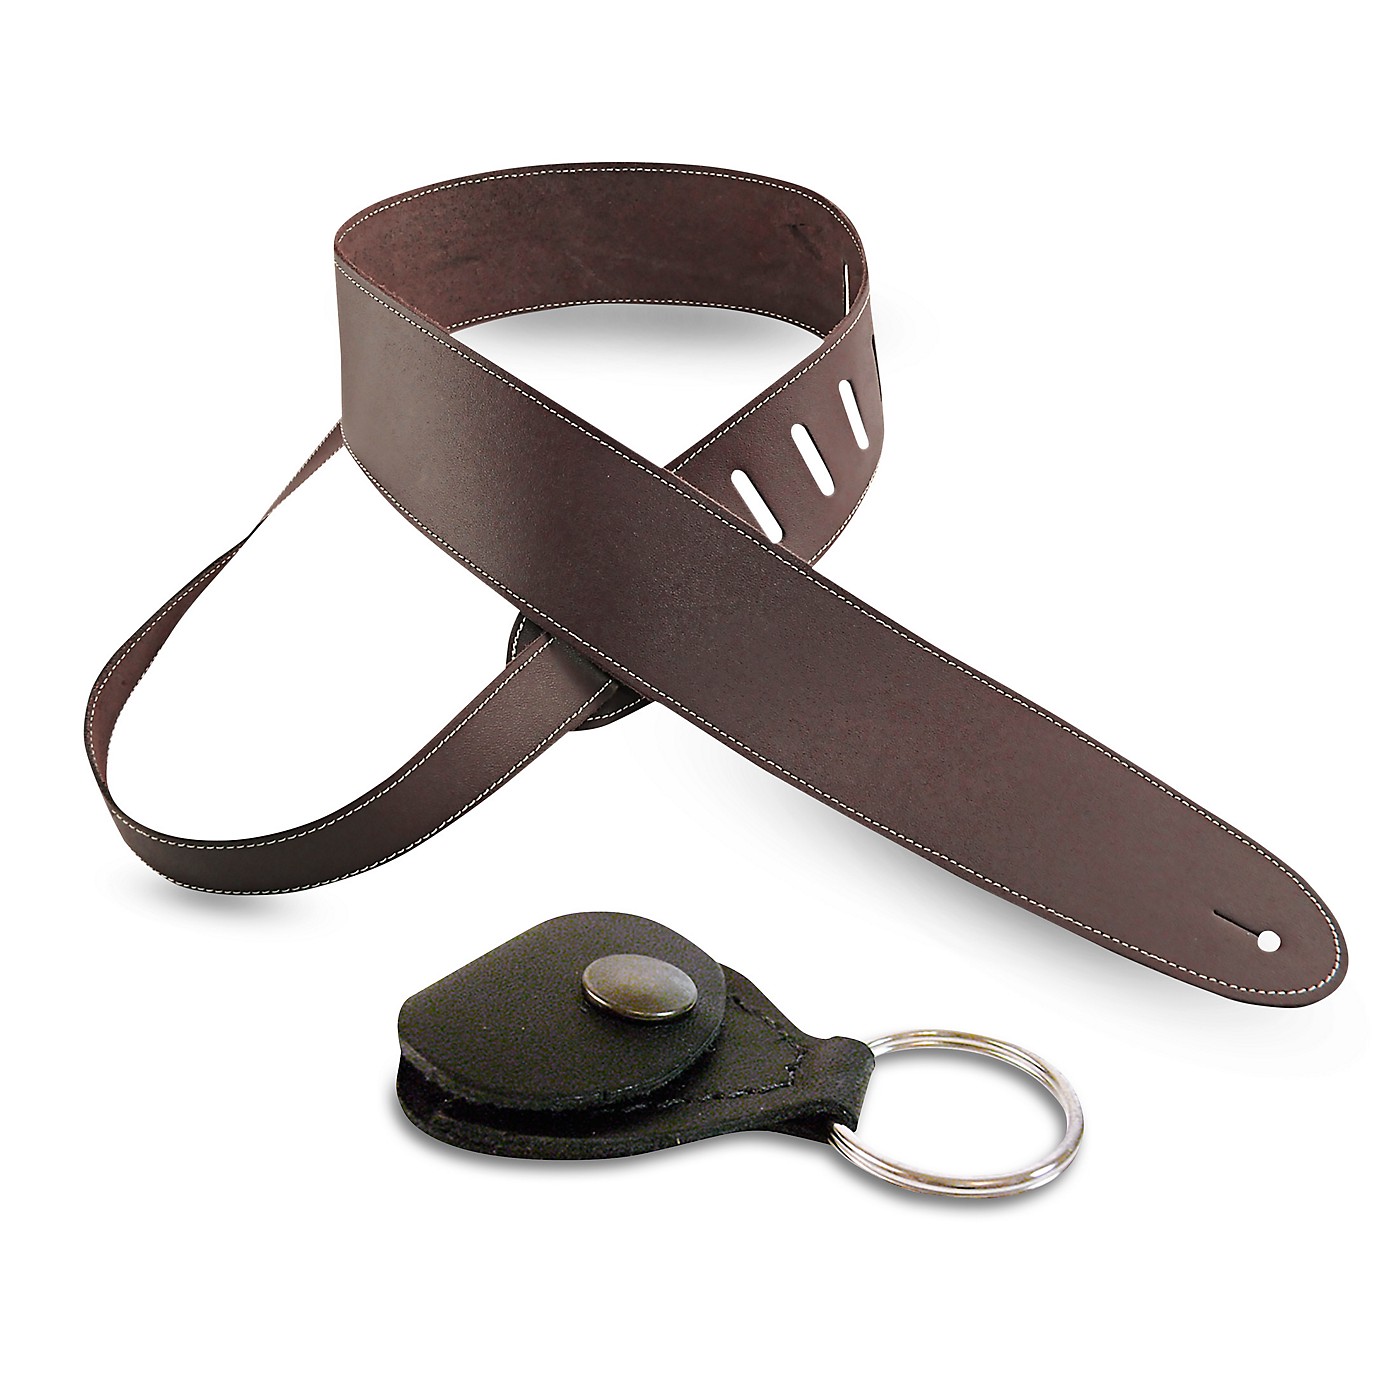 Perri's Basic Leather Guitar Strap with Leather Guitar Pick Key Chain thumbnail